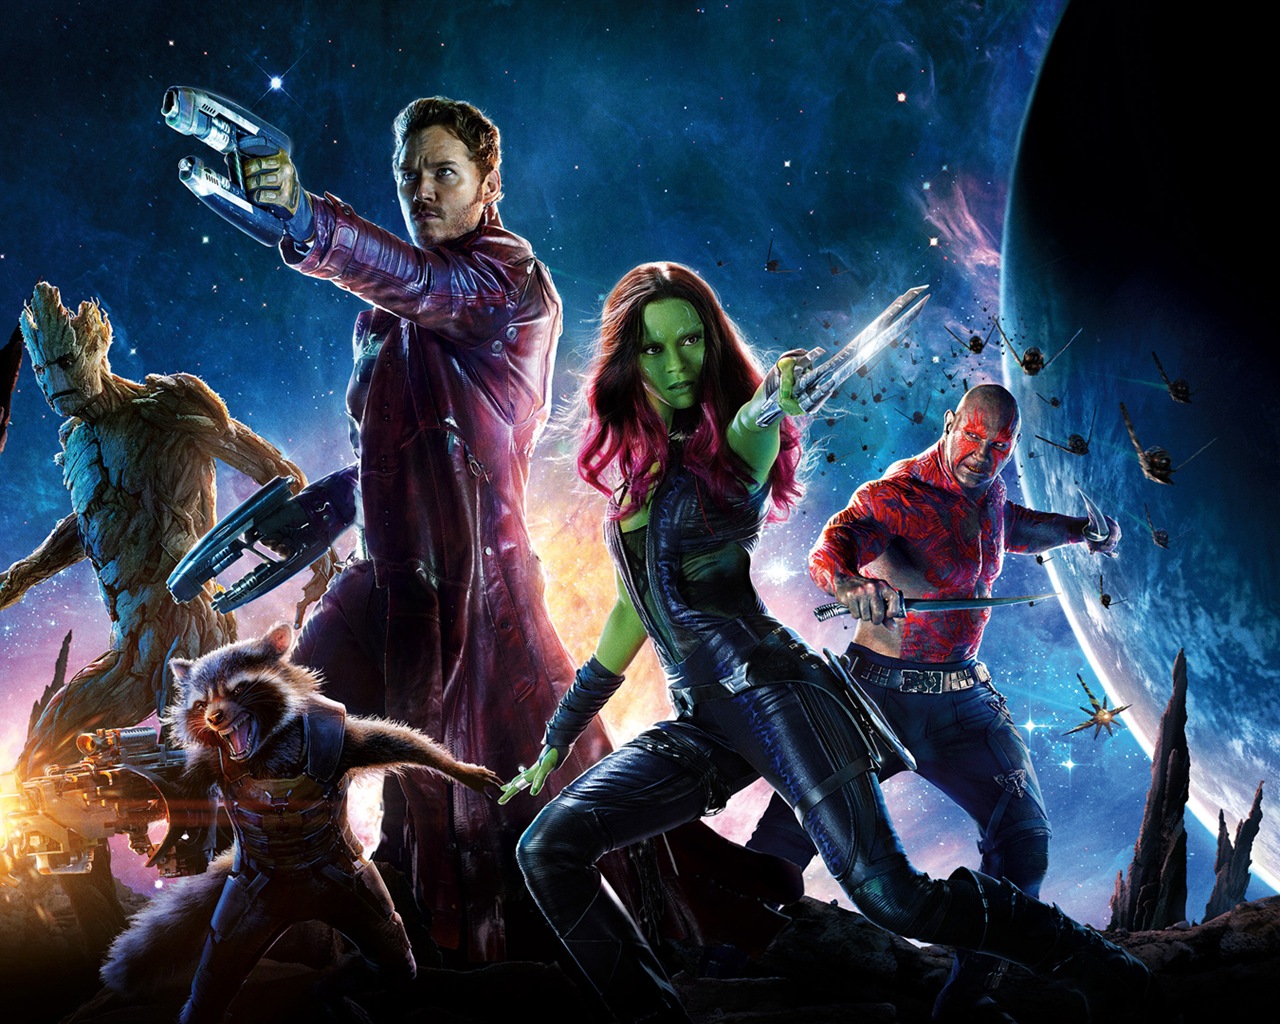 Guardians of the Galaxy 2014 HD movie wallpapers #9 - 1280x1024